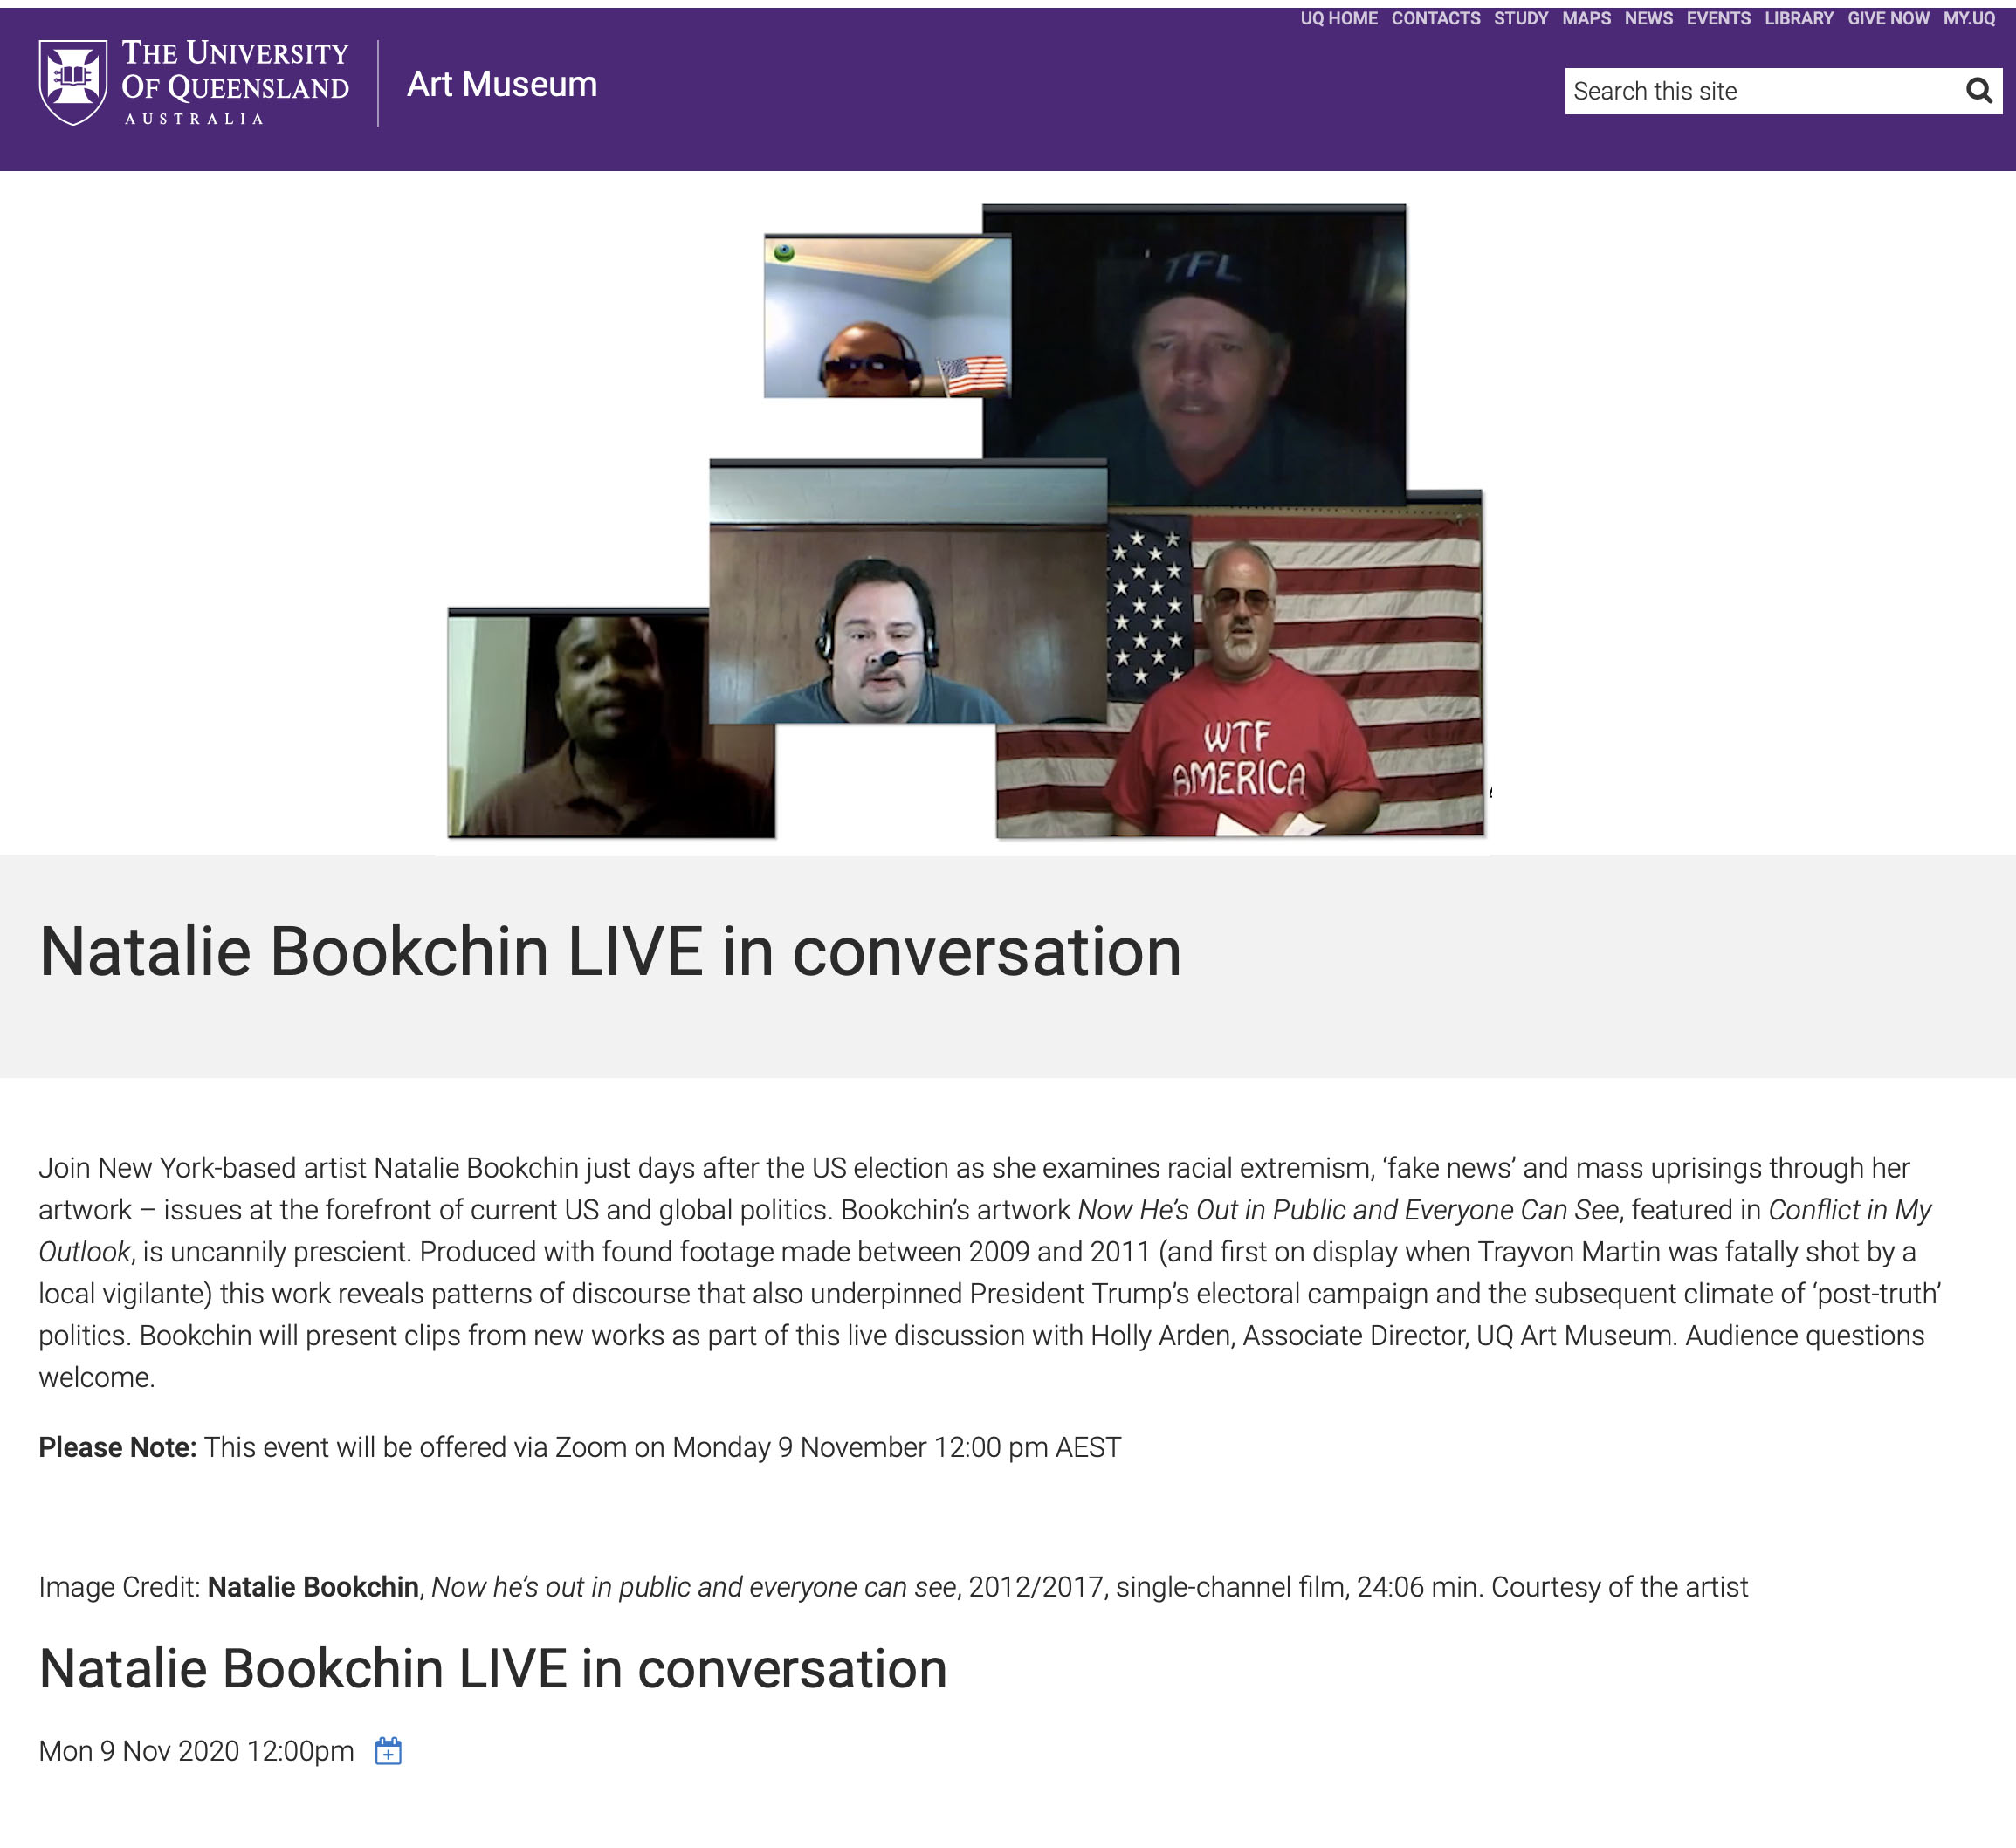 An invitation to a live conversation with Natalie Bookchin at the University of Queensland Art Museum 